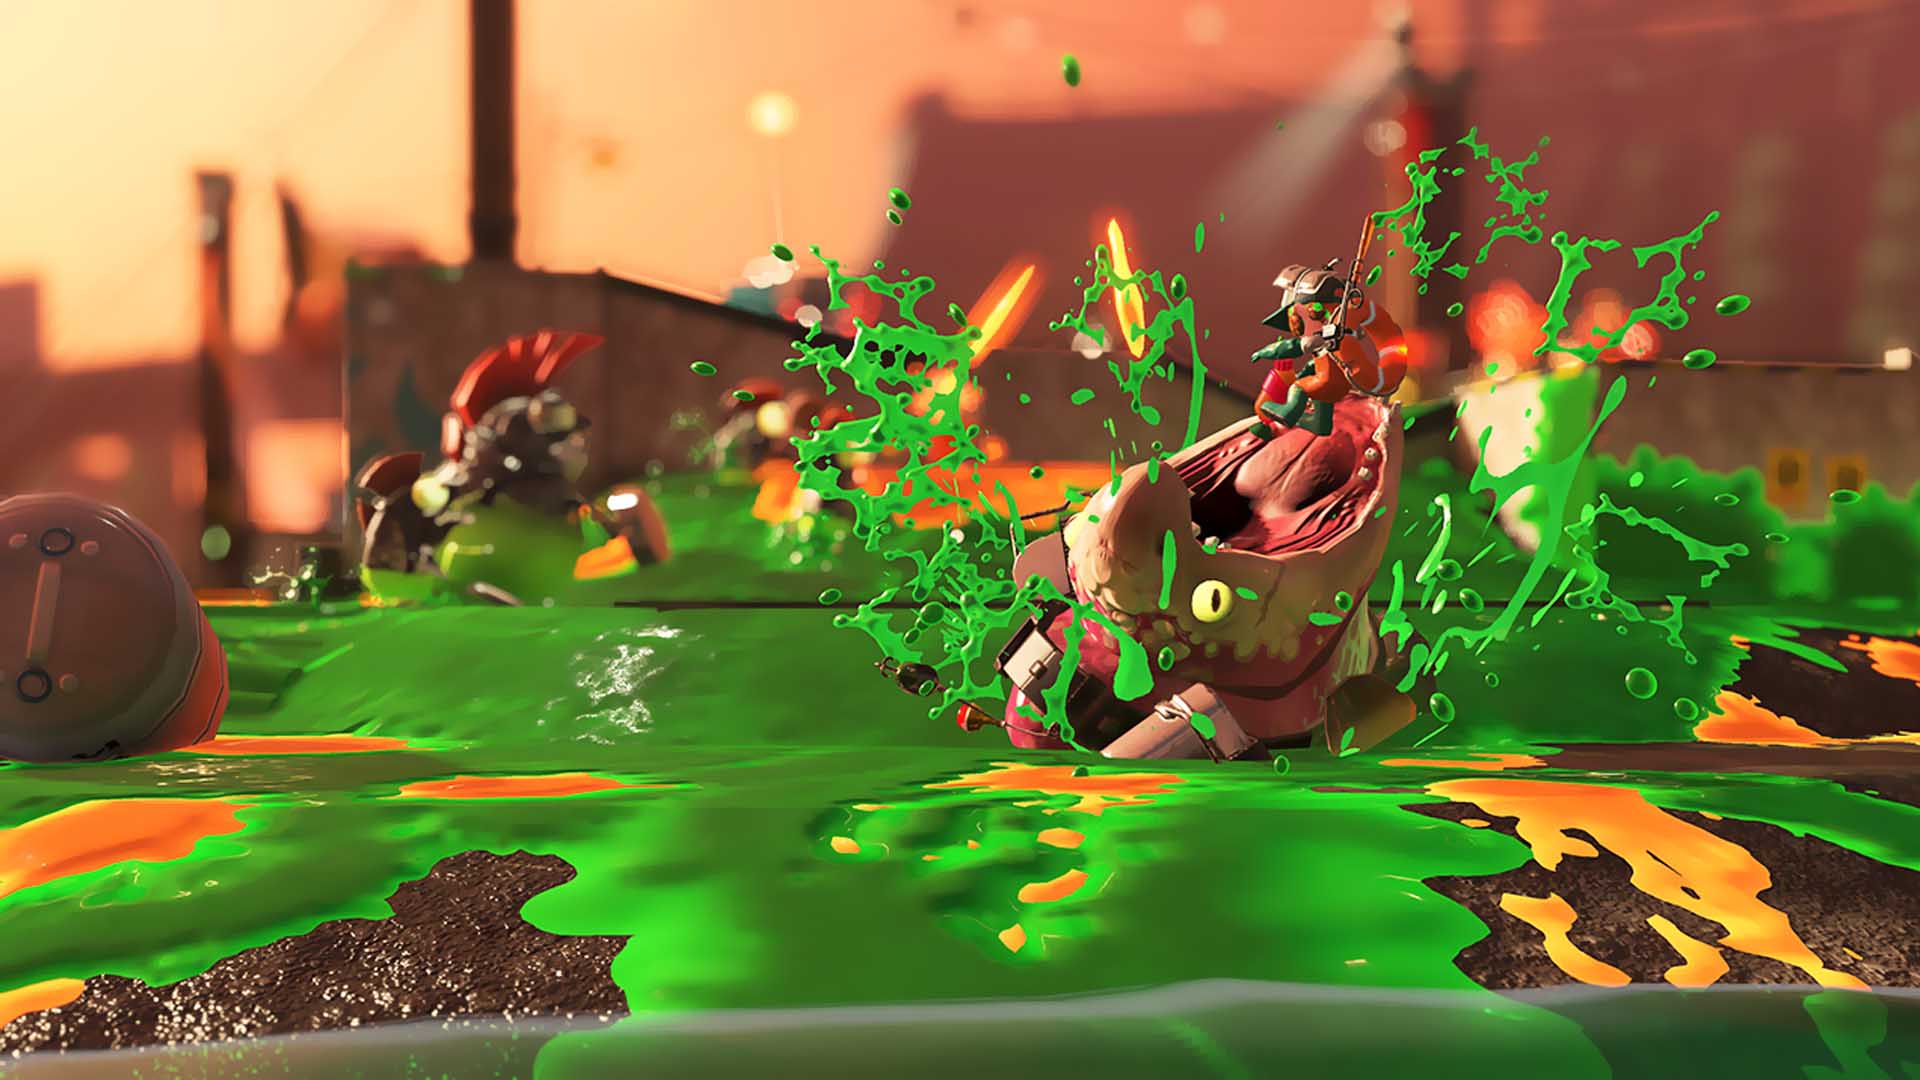 Maws lurking in ink to attack a poor inkling.